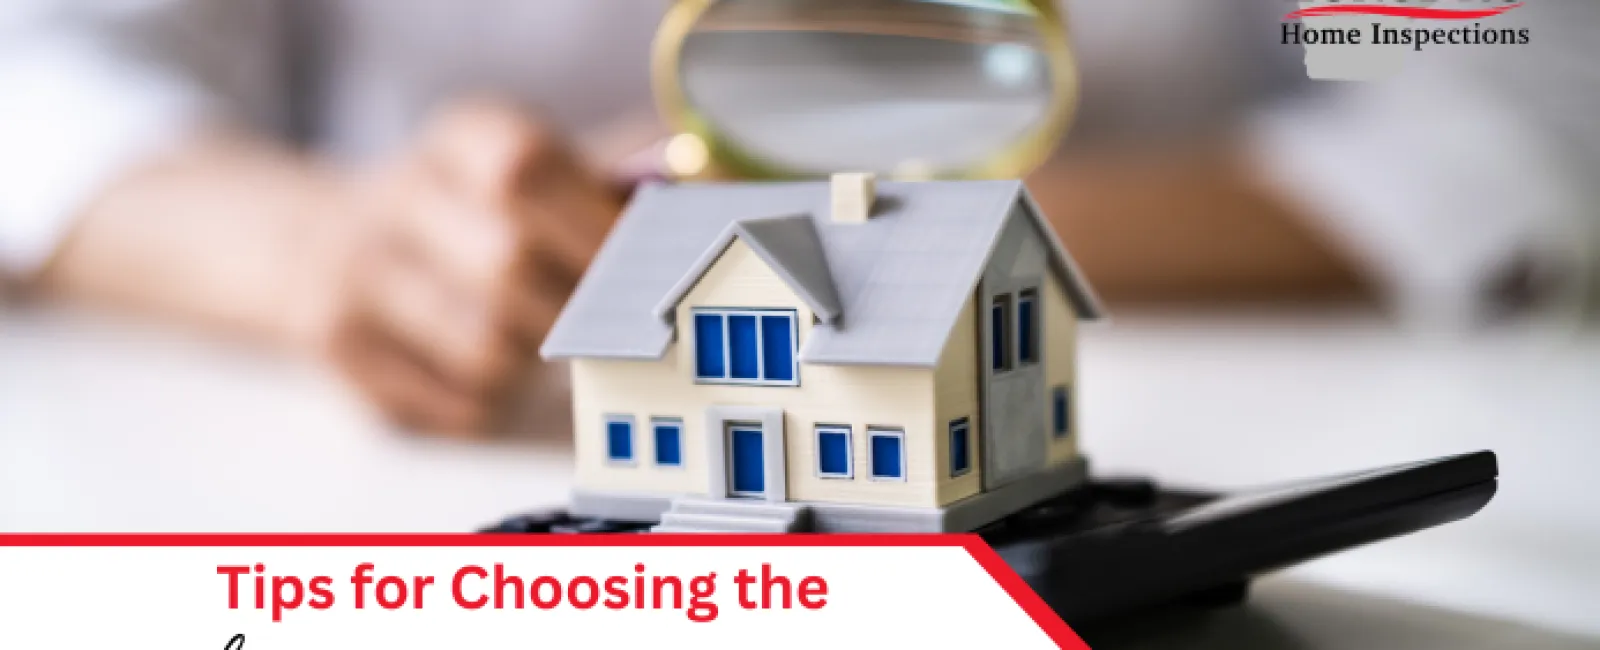 Tips for Choosing the Right Home Inspection Company